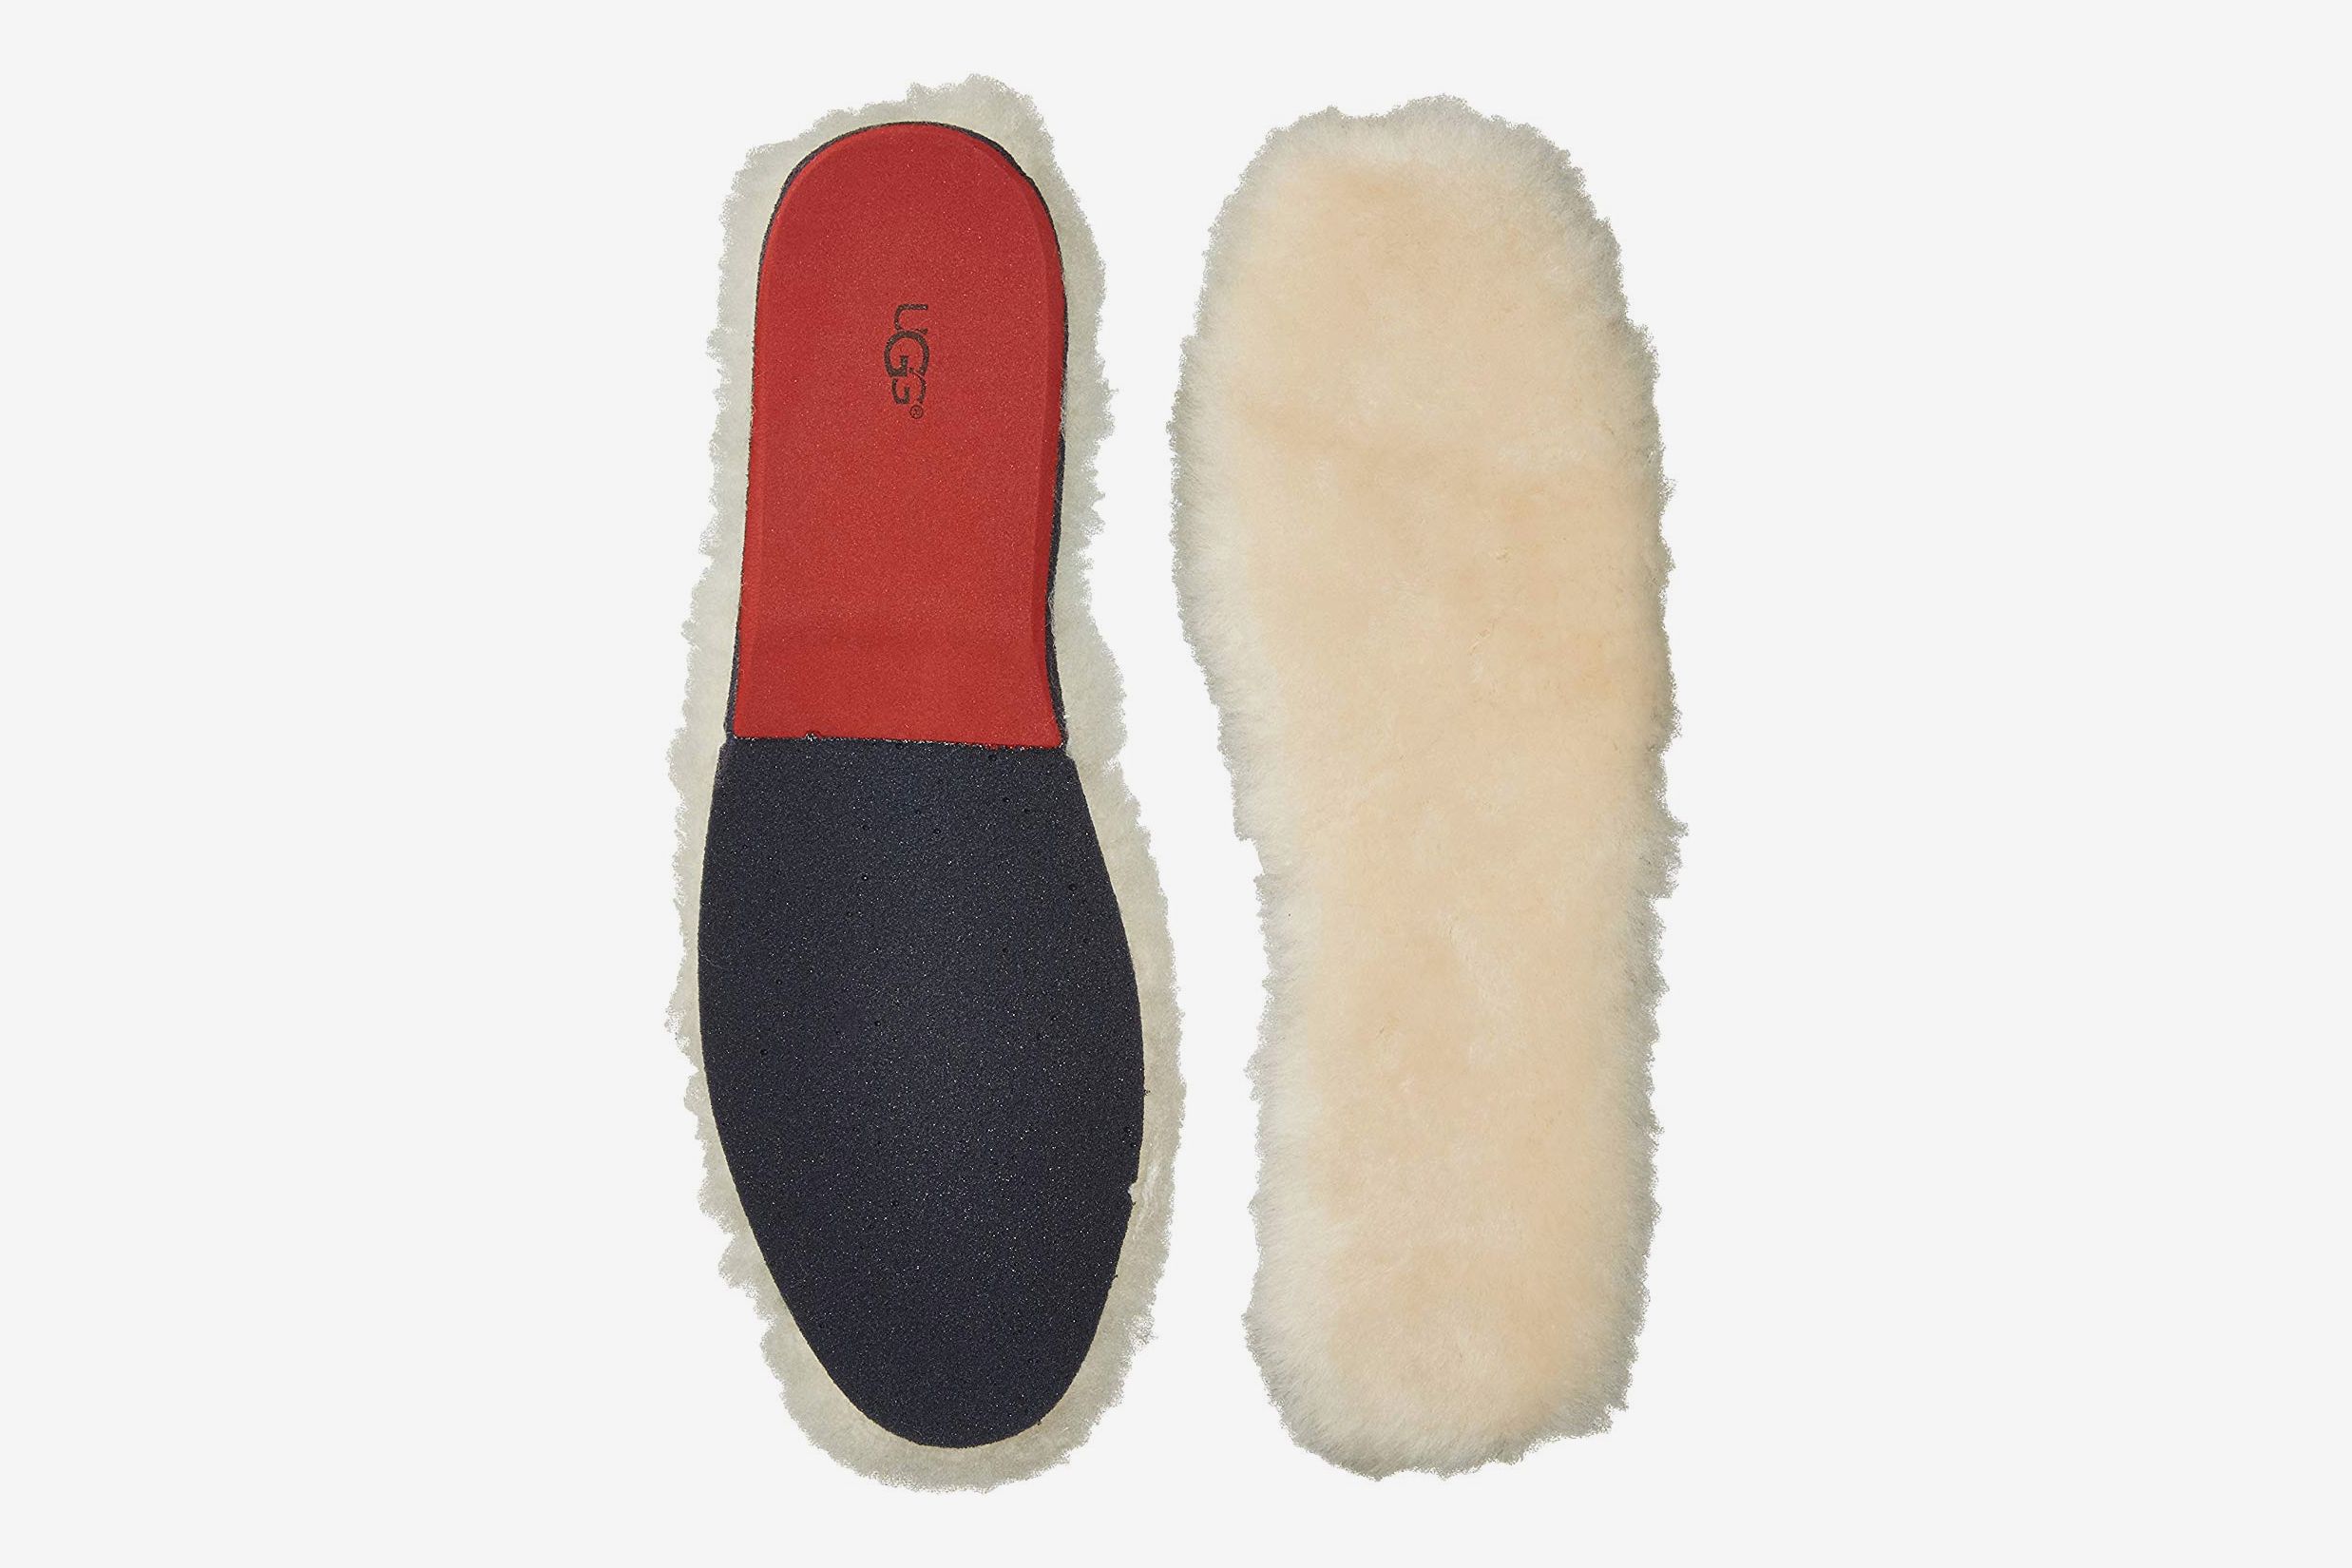 Merino Sheepskin Insoles Felt Thick Inner Soles Natural Wool for Shoes Boots!